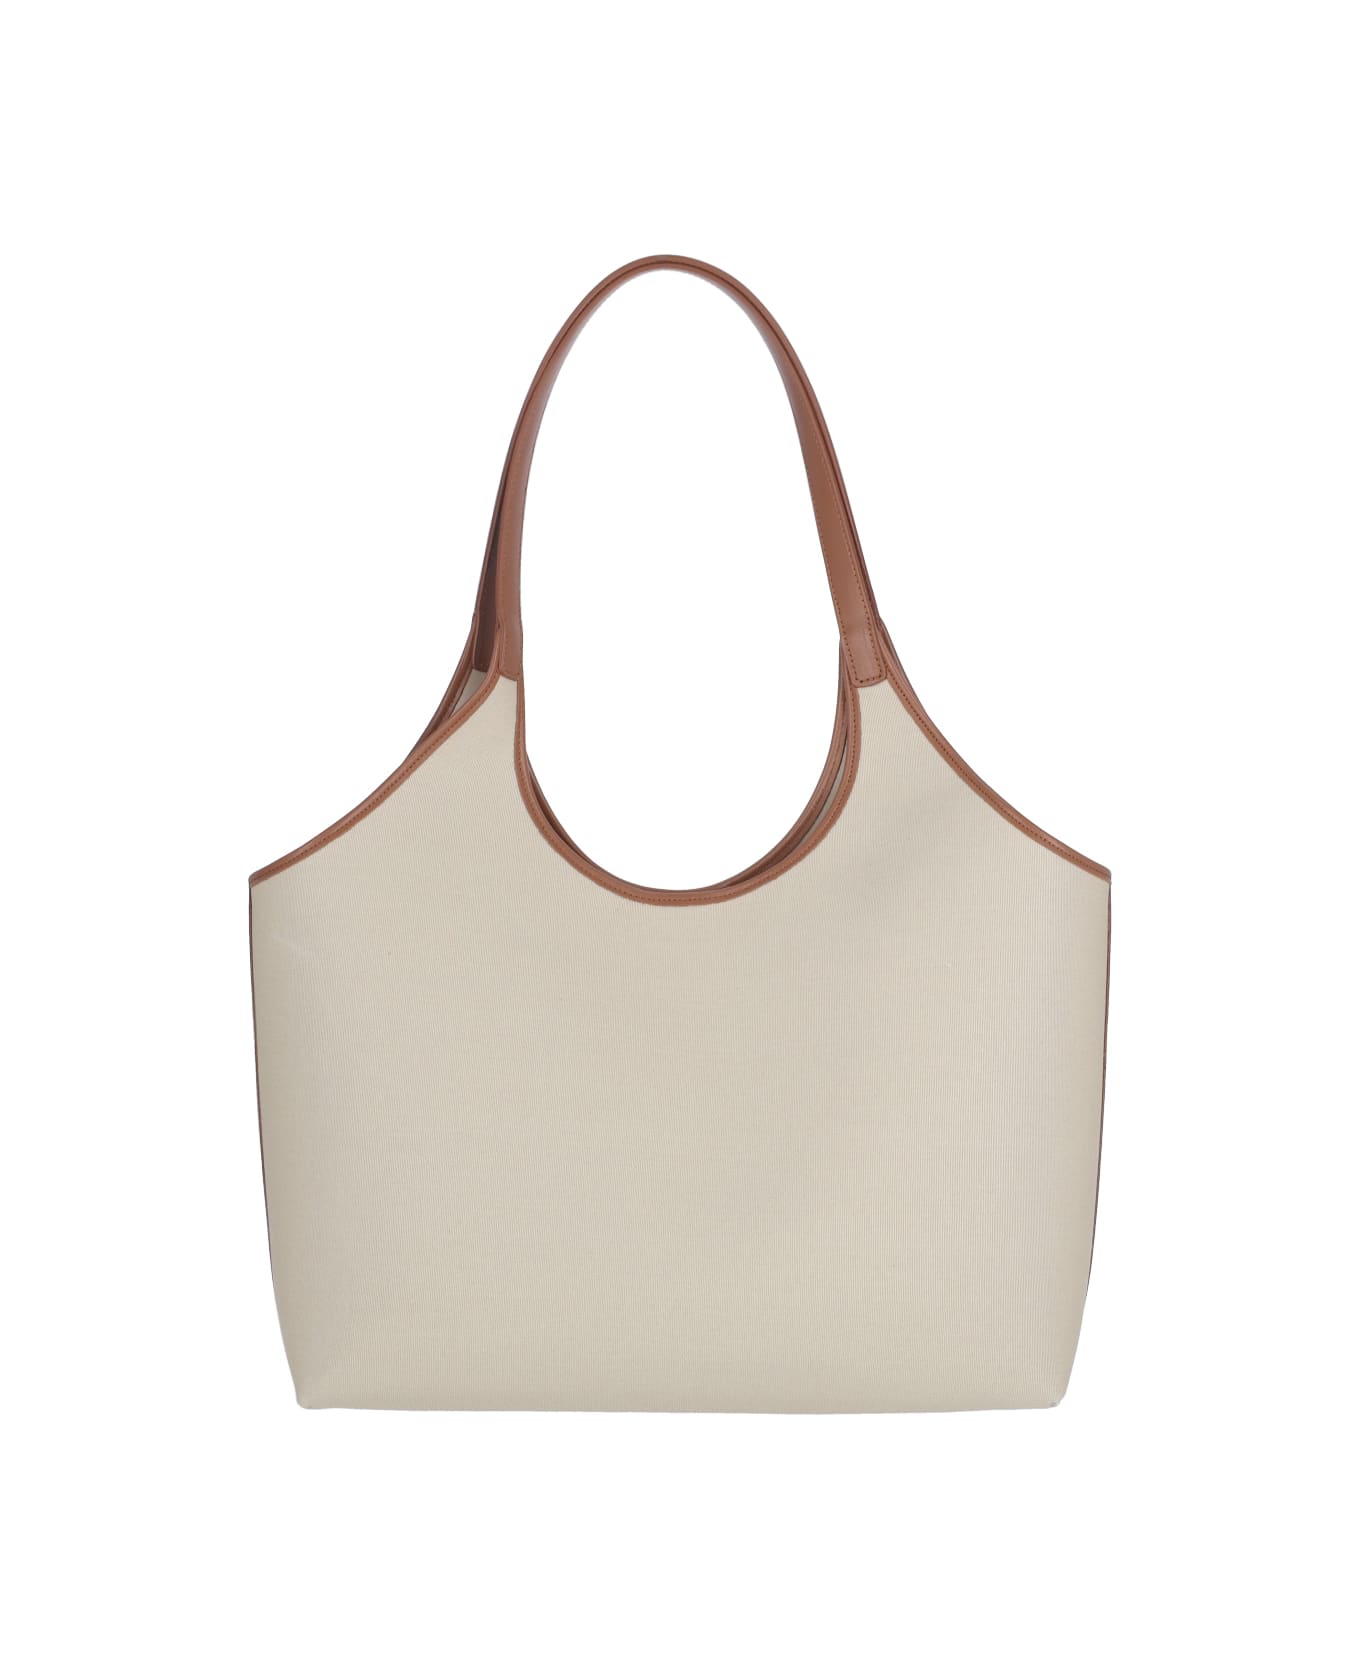 Aesther Ekme 'cabas' Tote Bag - Beige トートバッグ